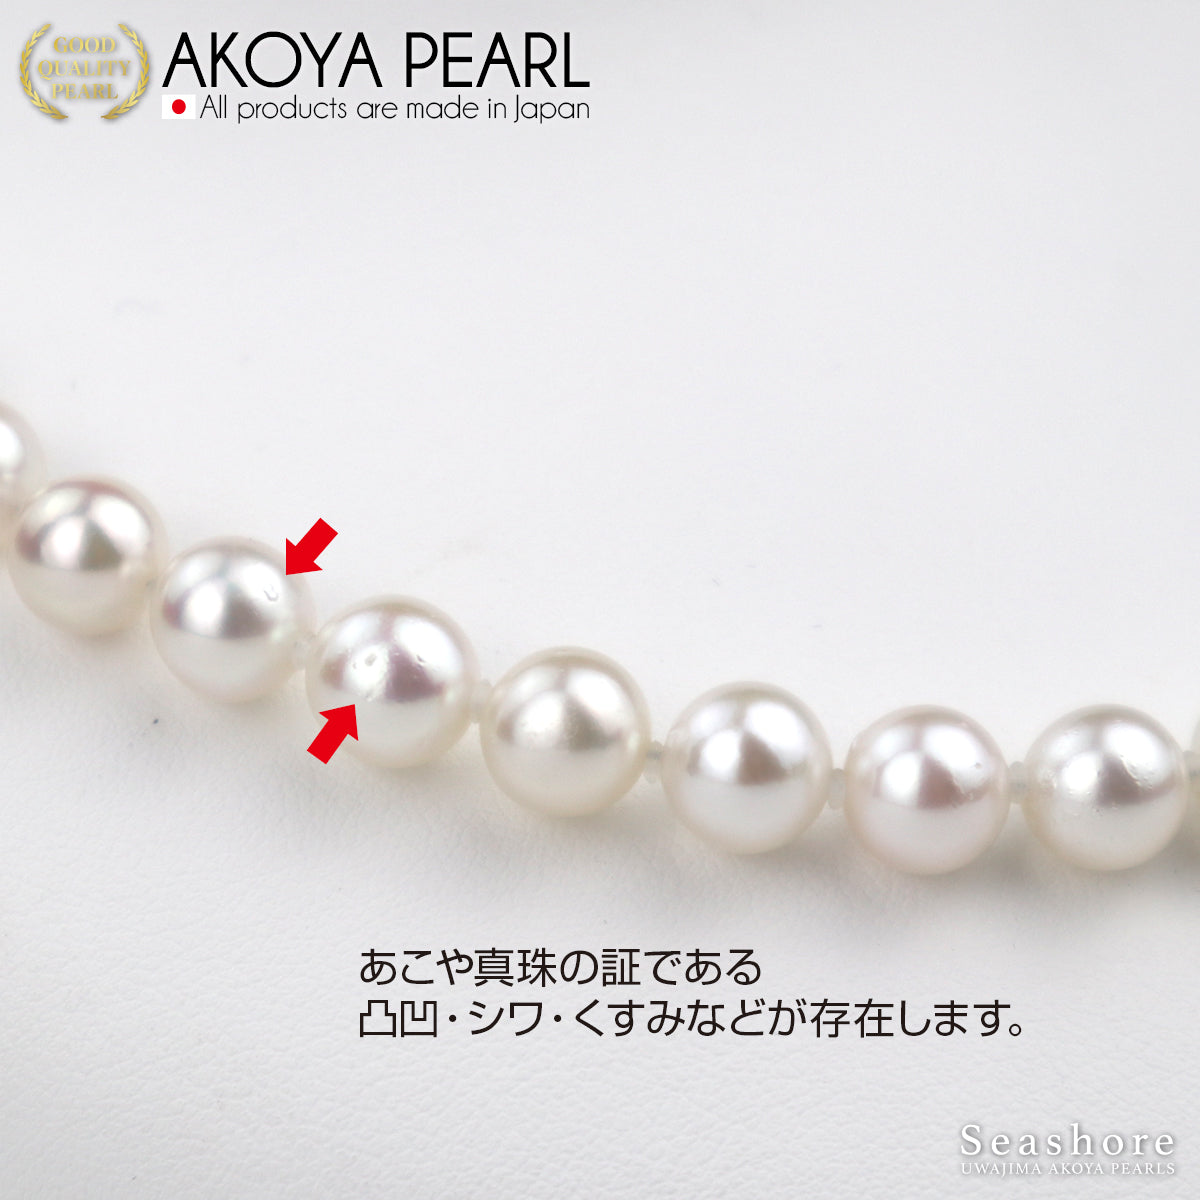 [Natural White] Uncolored Akoya Pearl Formal Necklace Set of 2 [7.5-8.0mm] (Earrings/Earrings) Certificate of Authenticity Storage Case Included Ceremonies